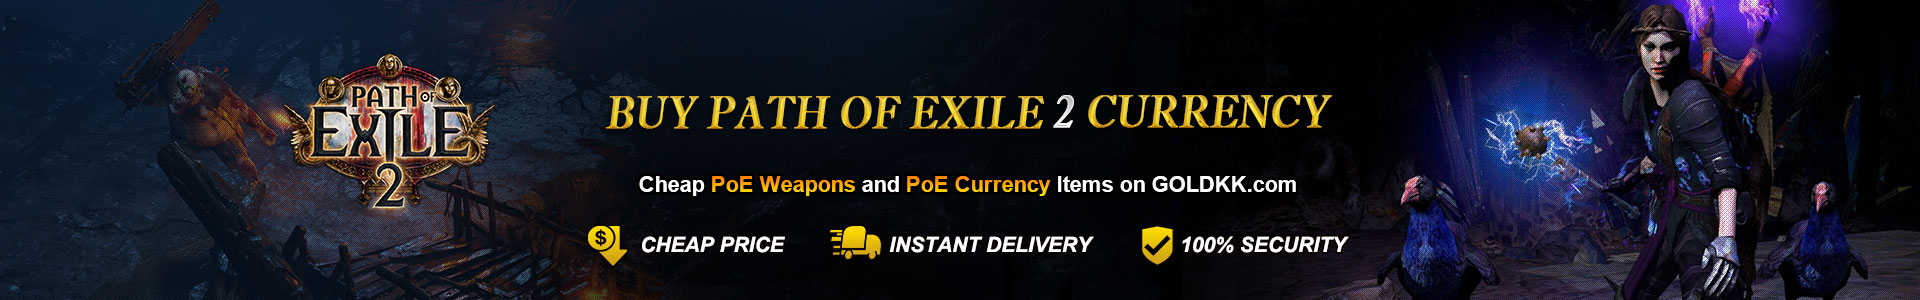 Path of Exile 2 Currency